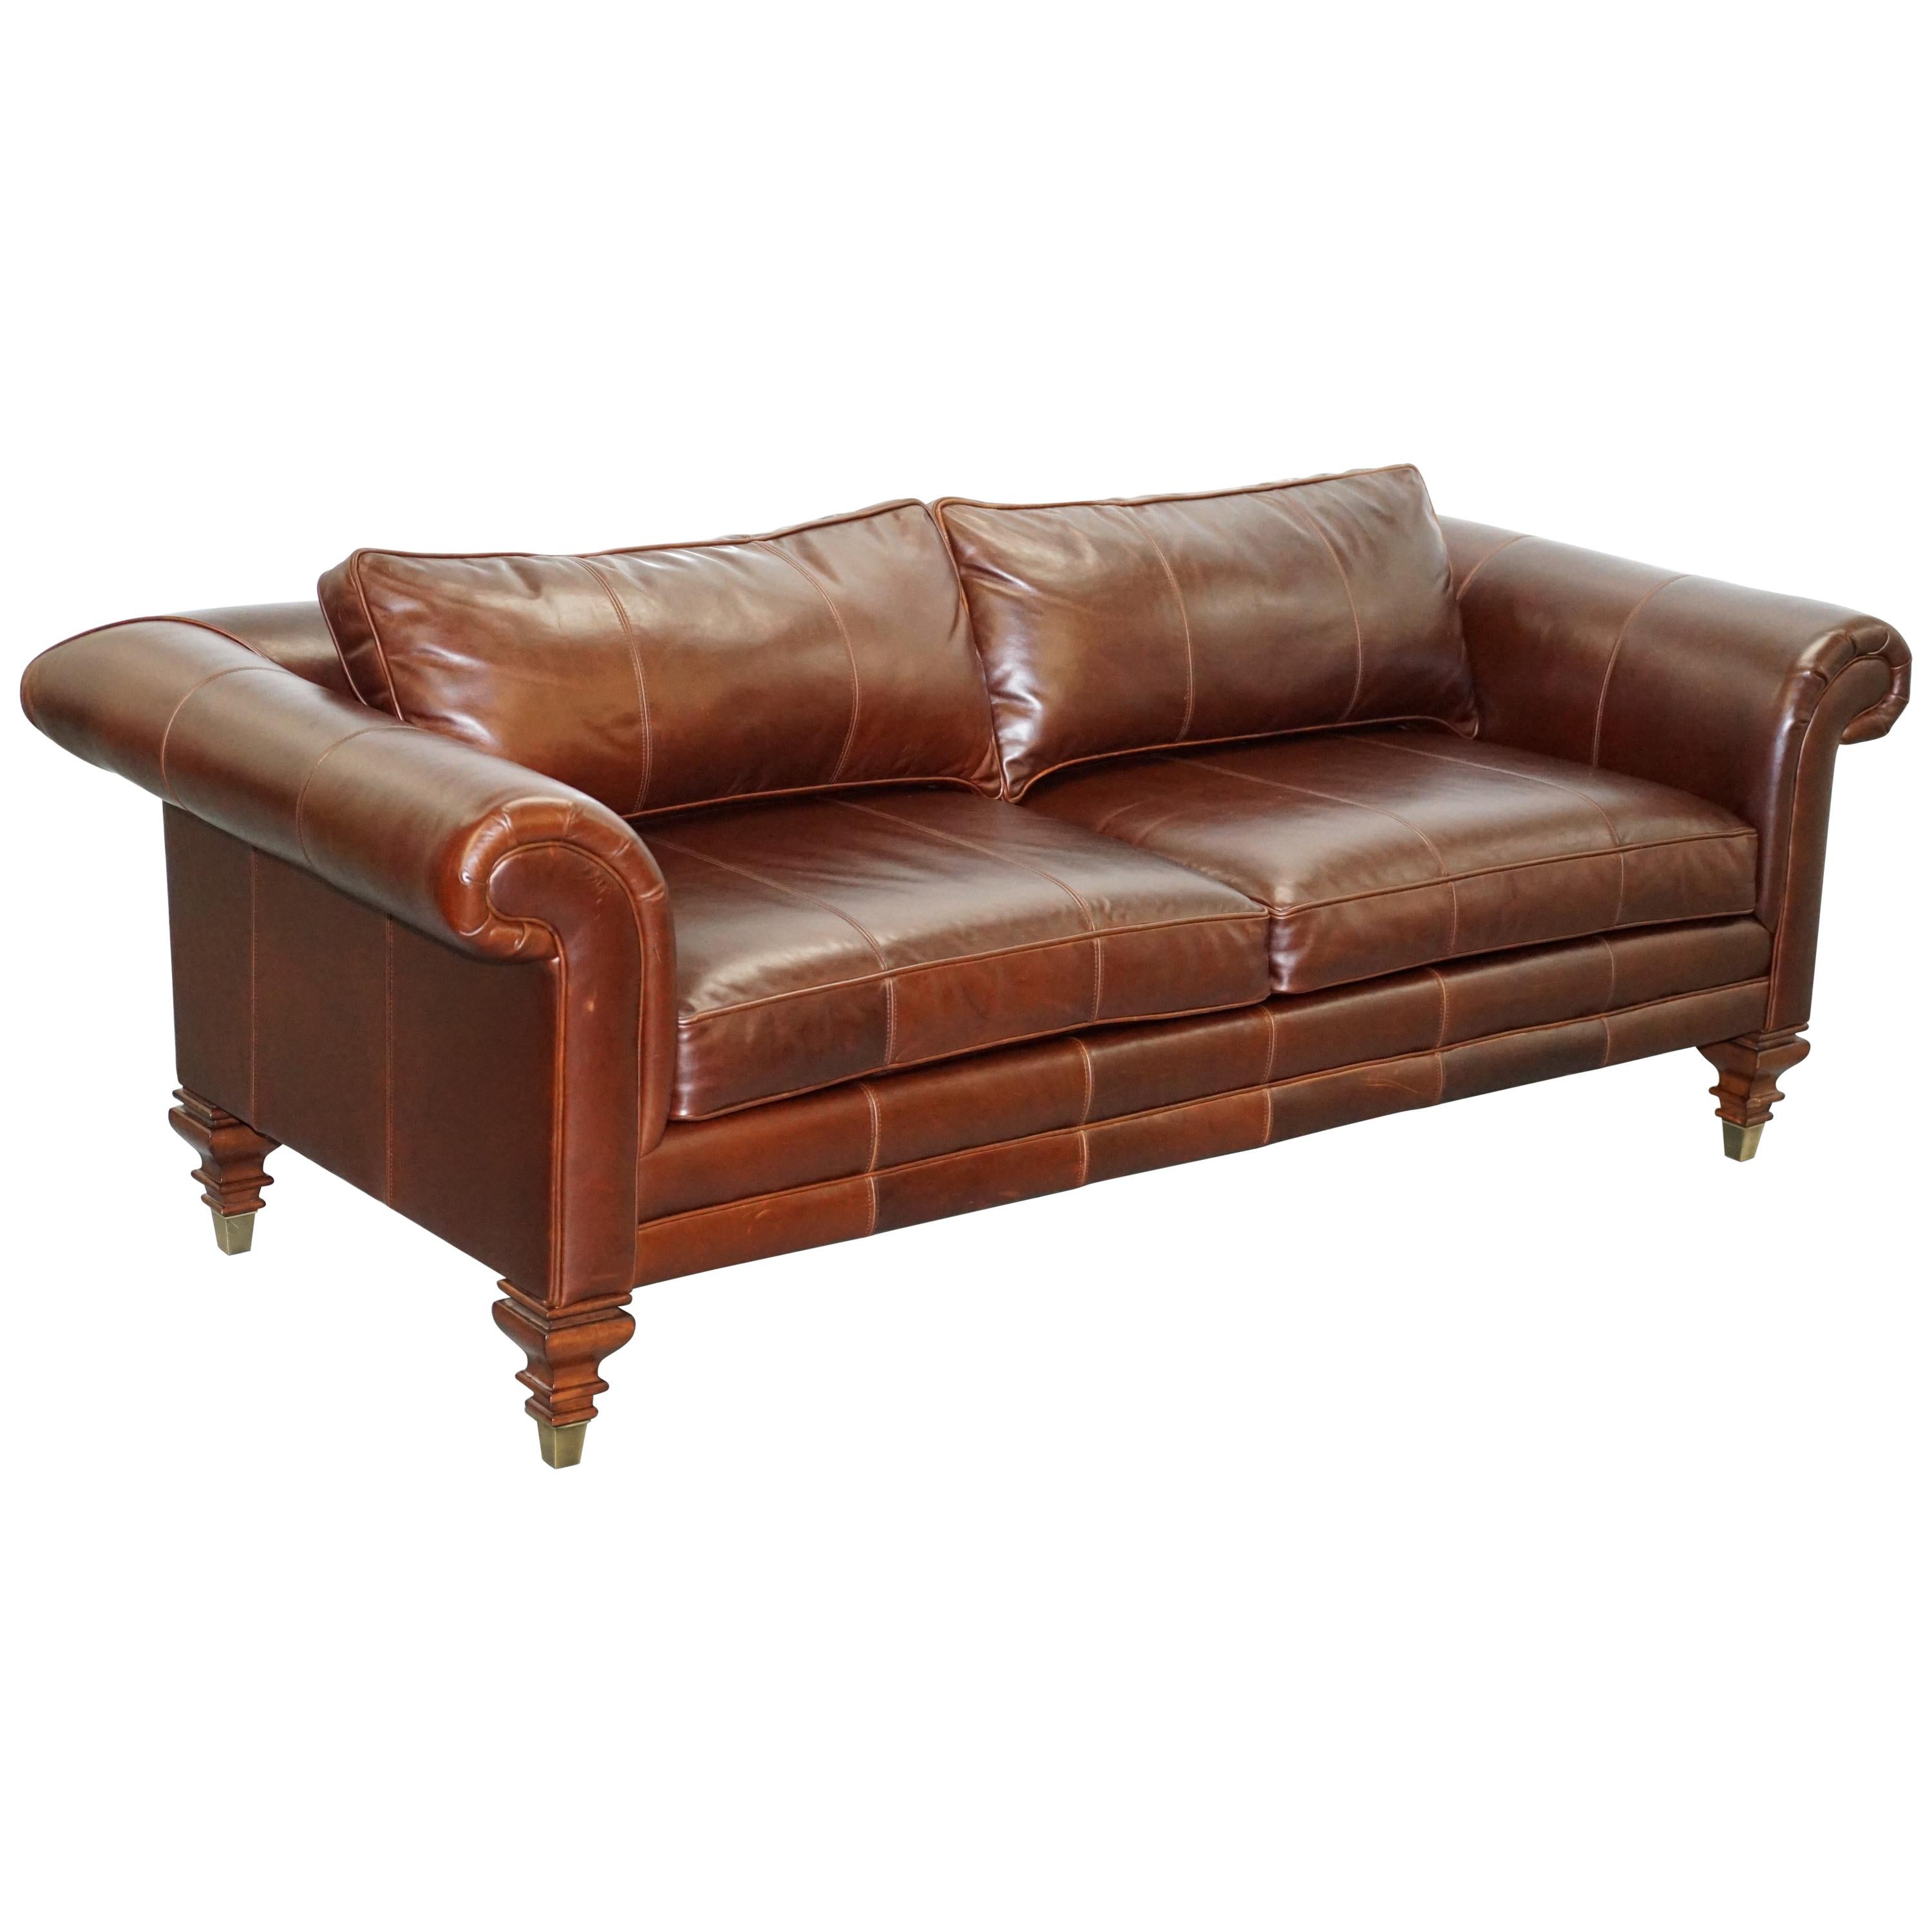 Stunning Ralph Lauren Colonial Thick Brown Leather Three-Seat Sofa